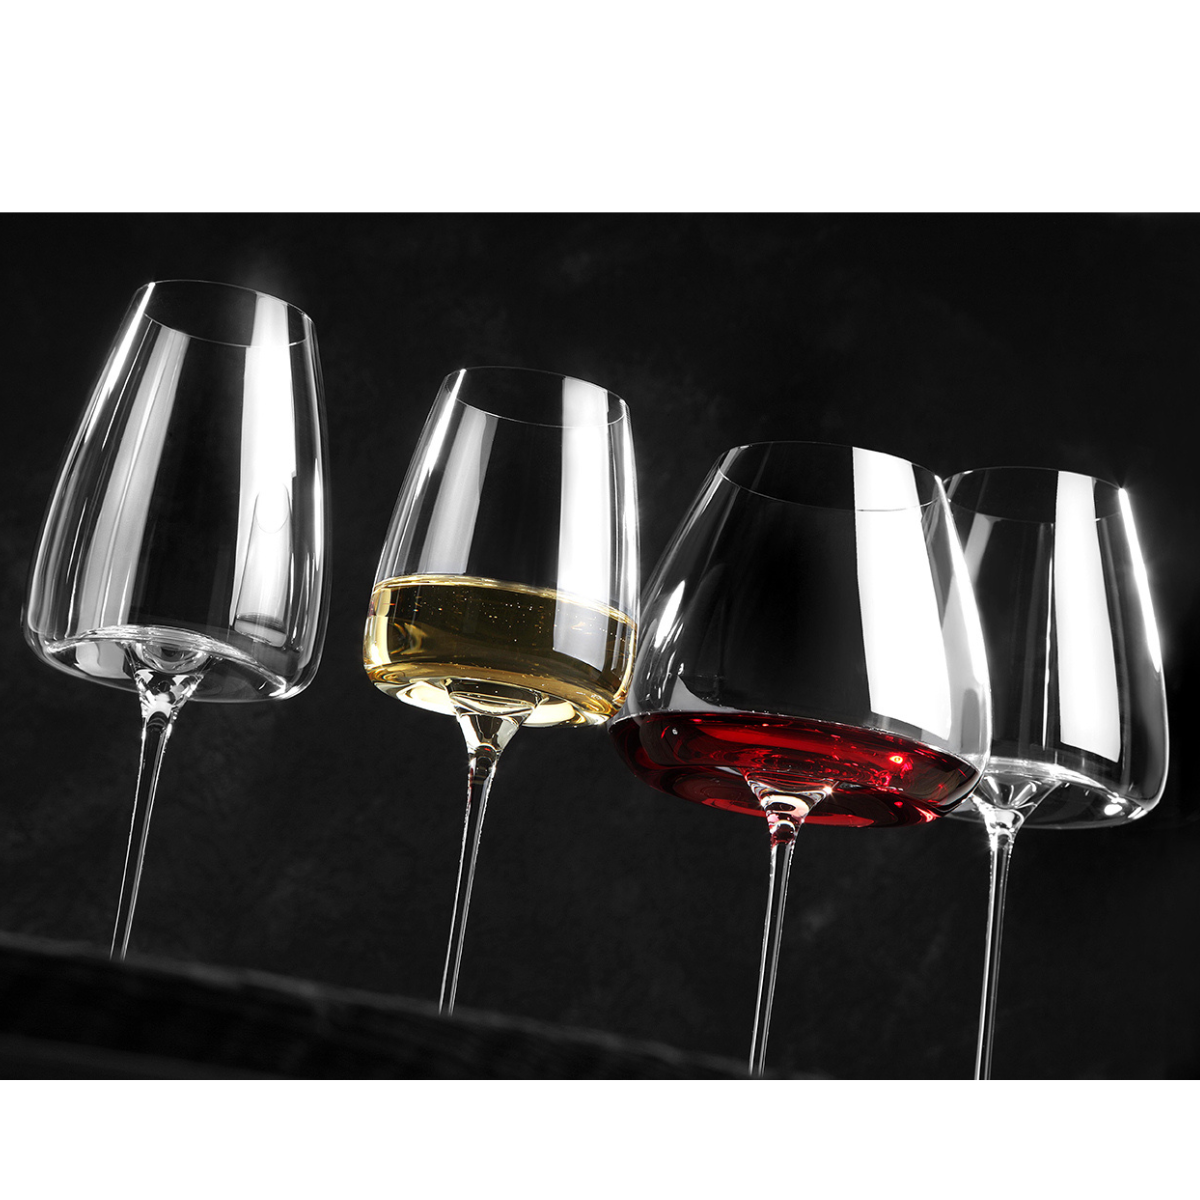 Ziher Vision Fresh Wine Glass in Single Pack Lead-free crystal made in Hungary